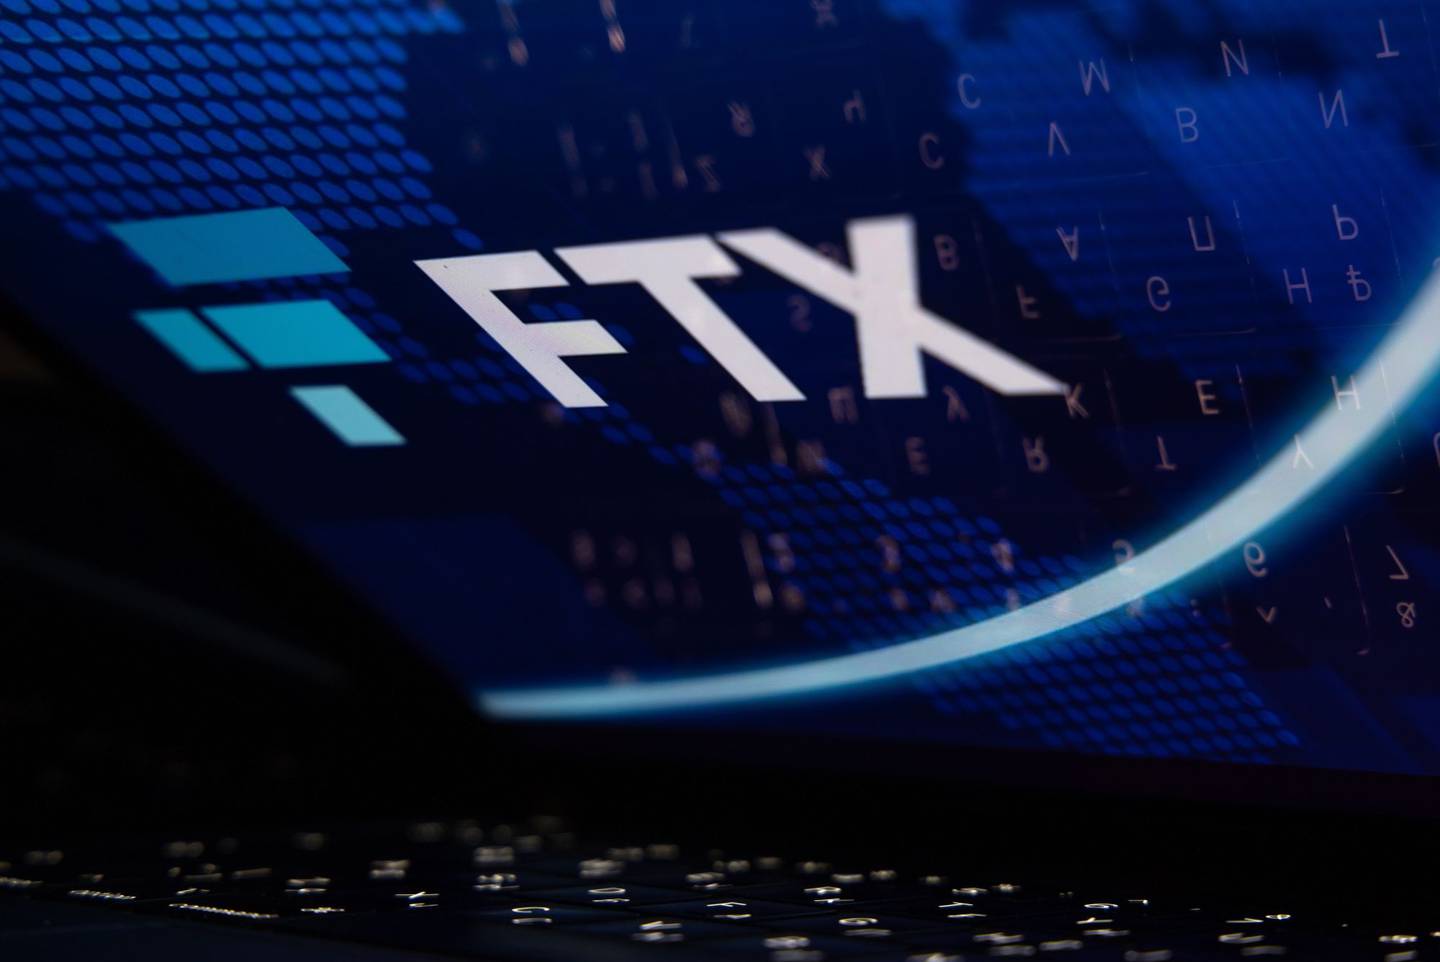 The FTX Cryptocurrency Derivatives Exchange logo on a laptop screen arranged in Riga, Latvia, Nov. 24, 2022. The implosion of Sam Bankman-Frieds FTX empire dealt a harsh blow to the Bahamas ambitions to be a hub for the crypto industry, and its causing massive pain for locals who treated the now-bankrupt exchange like a bank. Photographer: Andrey Rudakov/Bloomberg